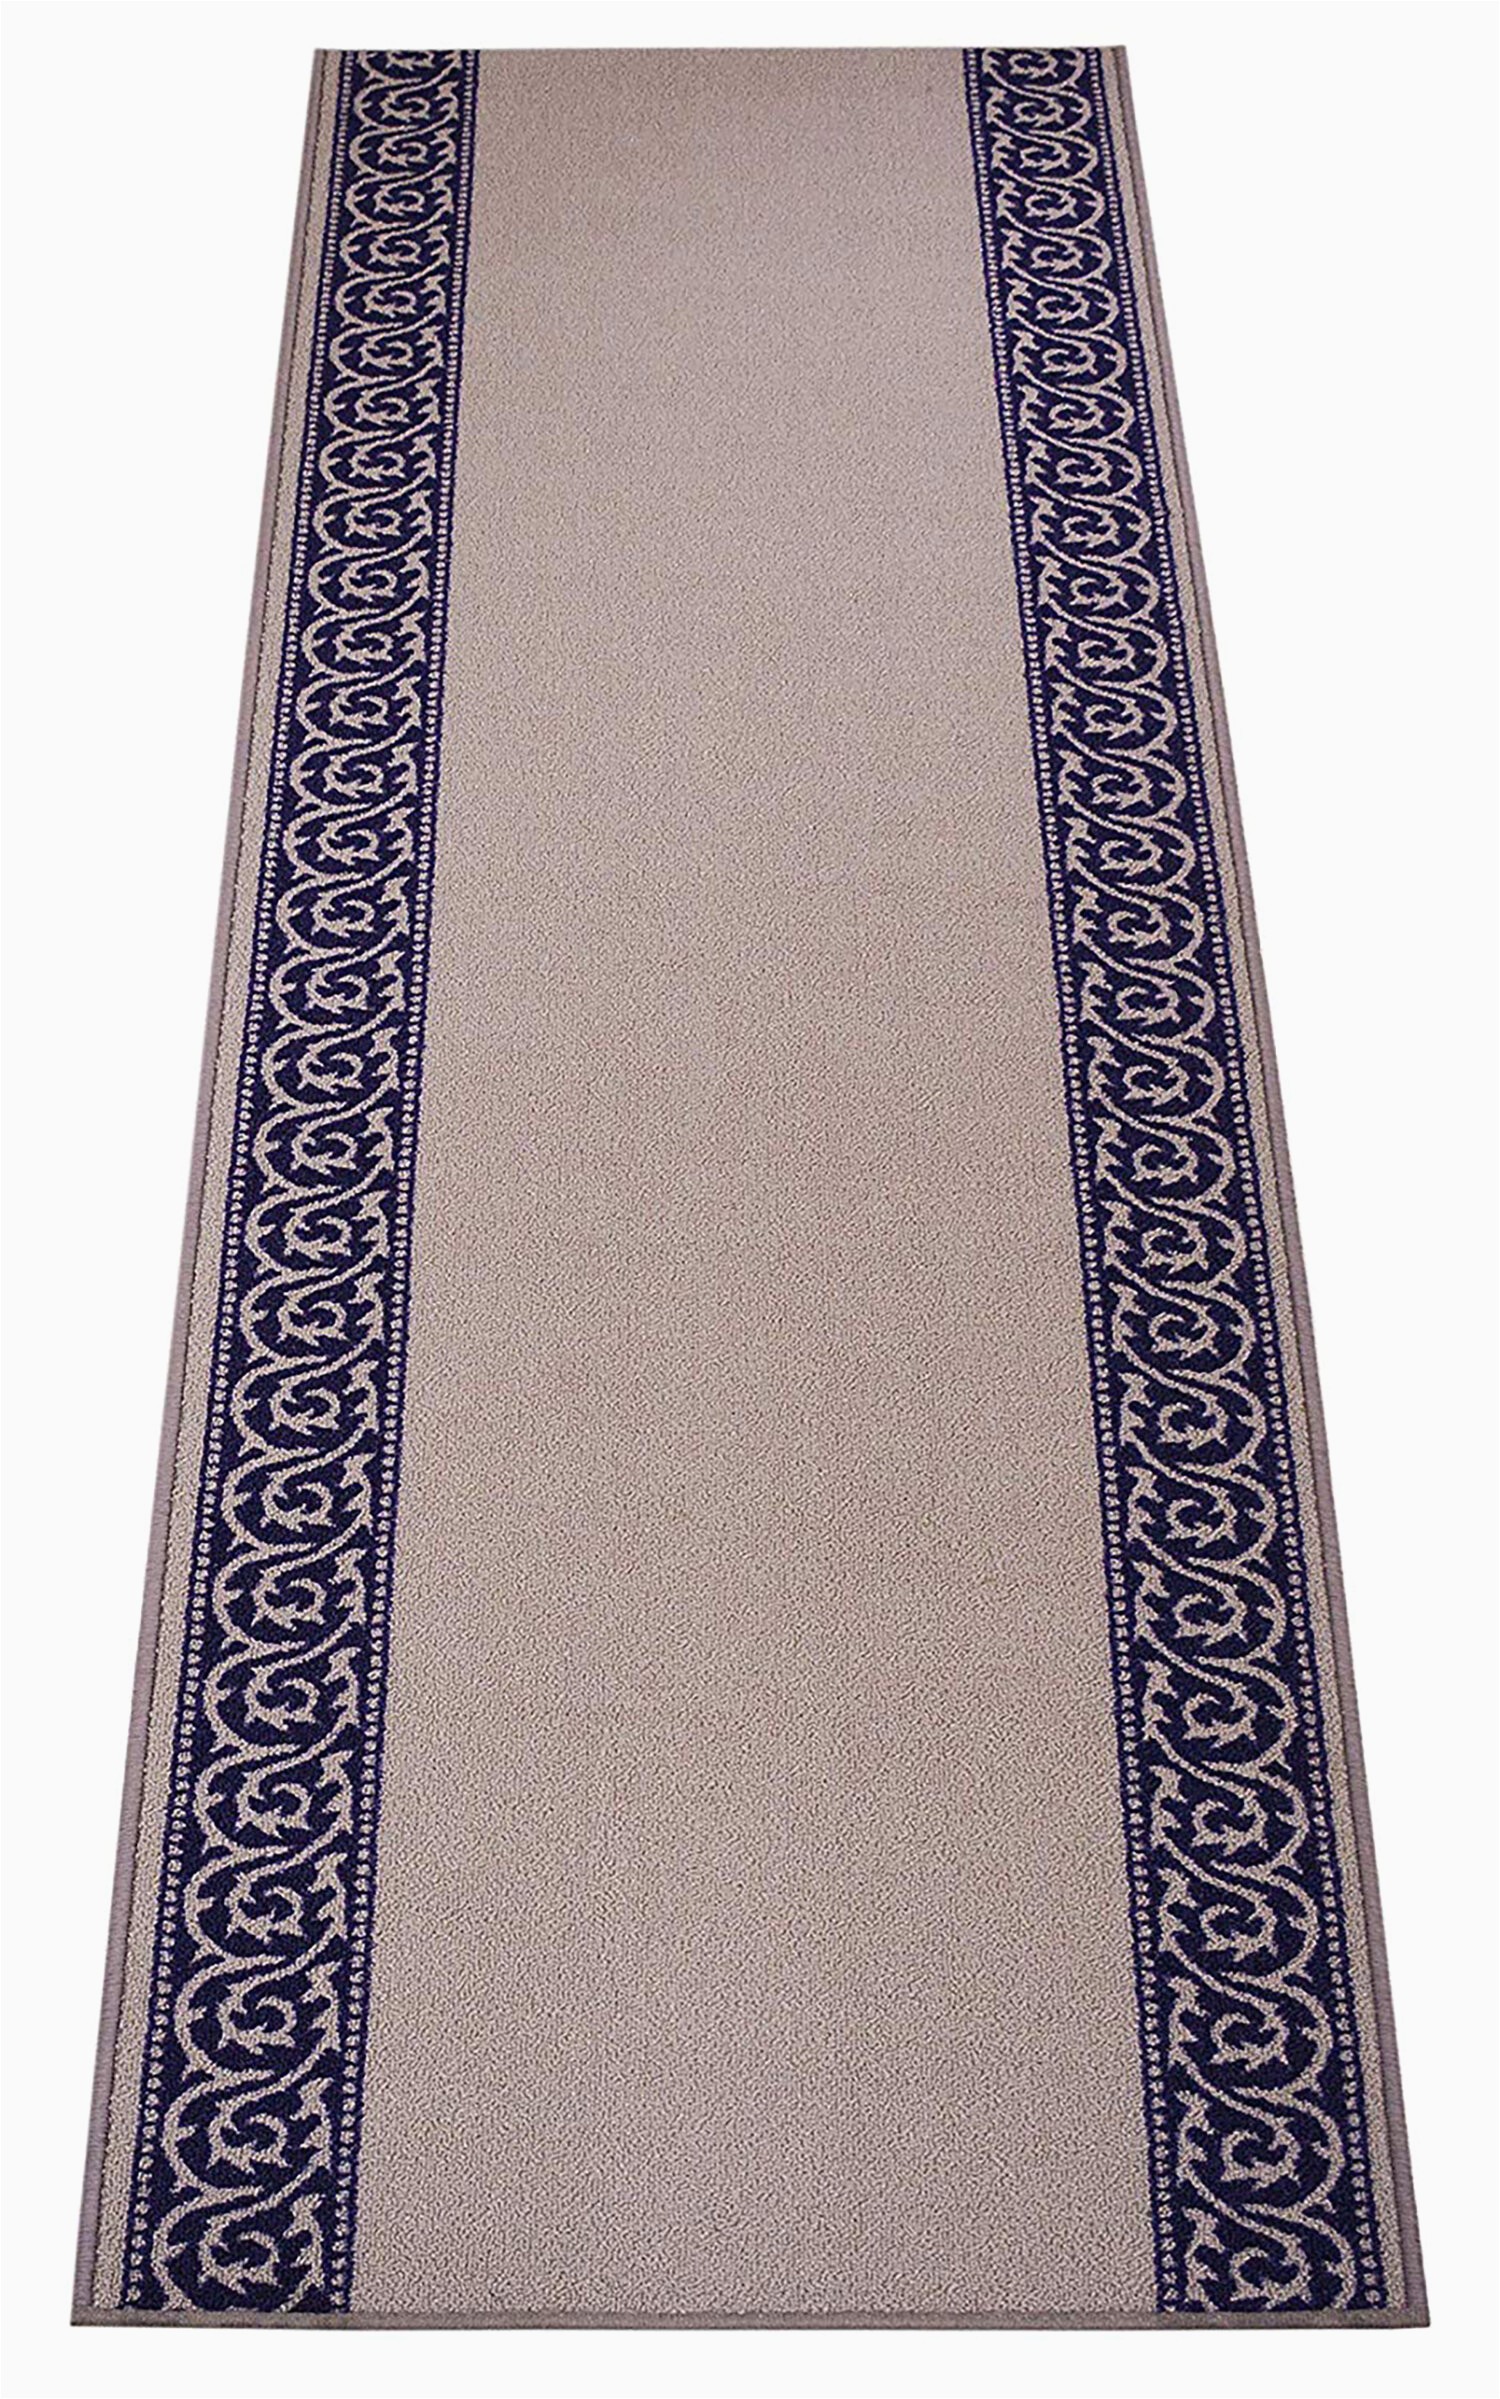 Bath Rugs without Rubber Backing Stratmoor Slip Skid Resistant Rubber Back Rectangle Nylon Non Slip Bath Rug